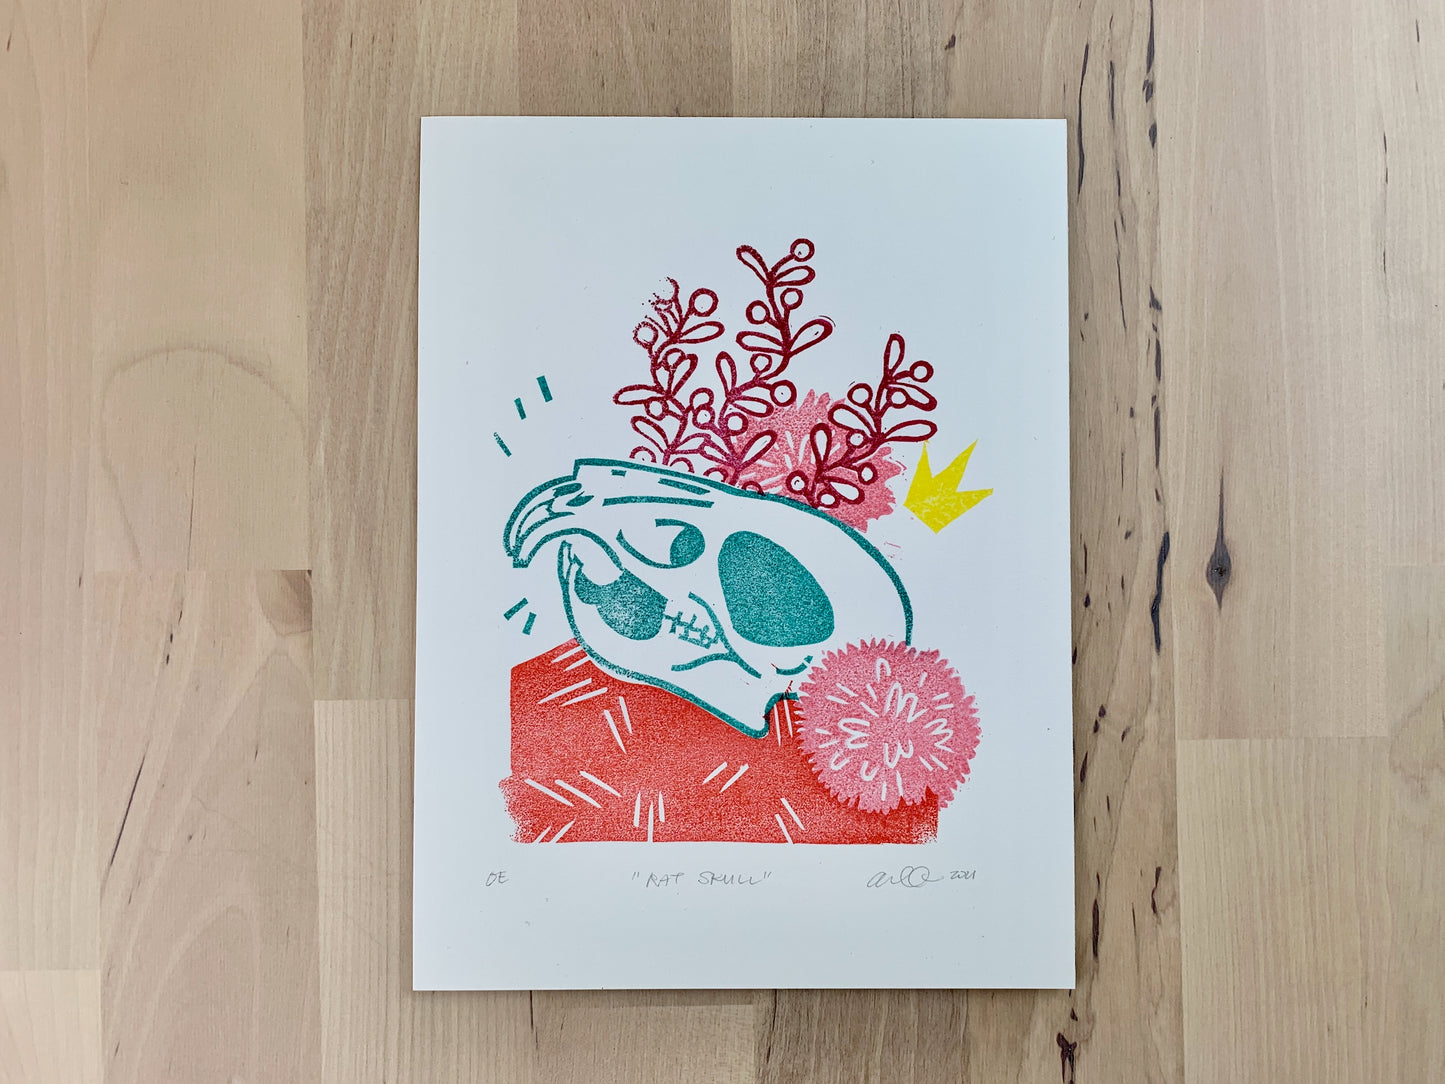 Original art print by Amber Orenstein. A relief print of a lion skull with crown and floral accents.